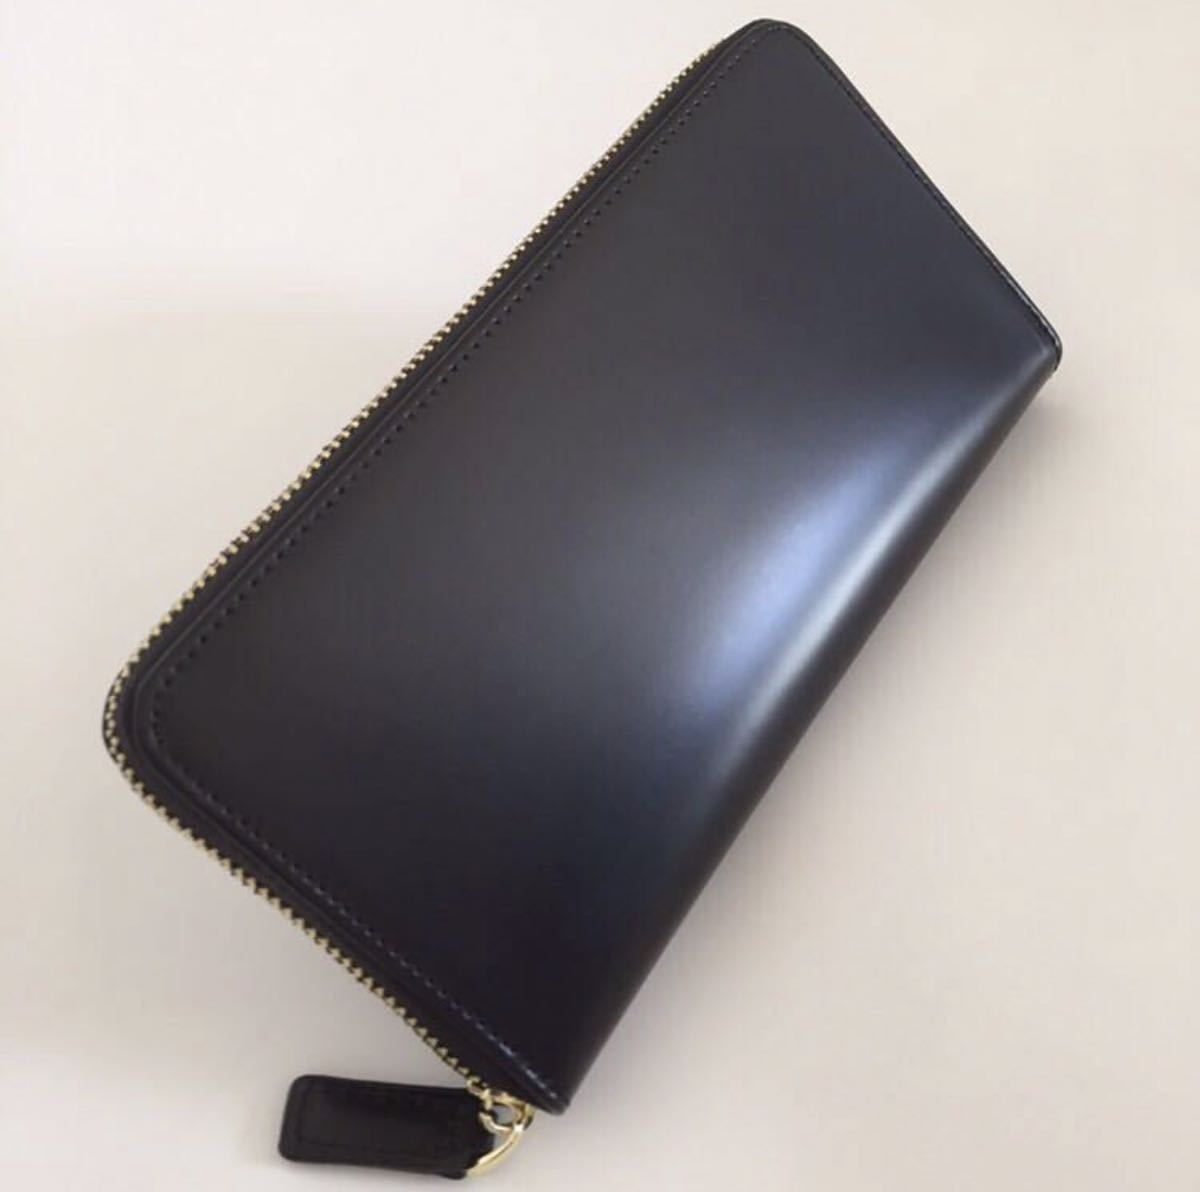  limited amount black /. white Italian leather hand made men's cow leather original leather man and woman use & handmade super popular round fastener & long wallet // change purse . equipped 